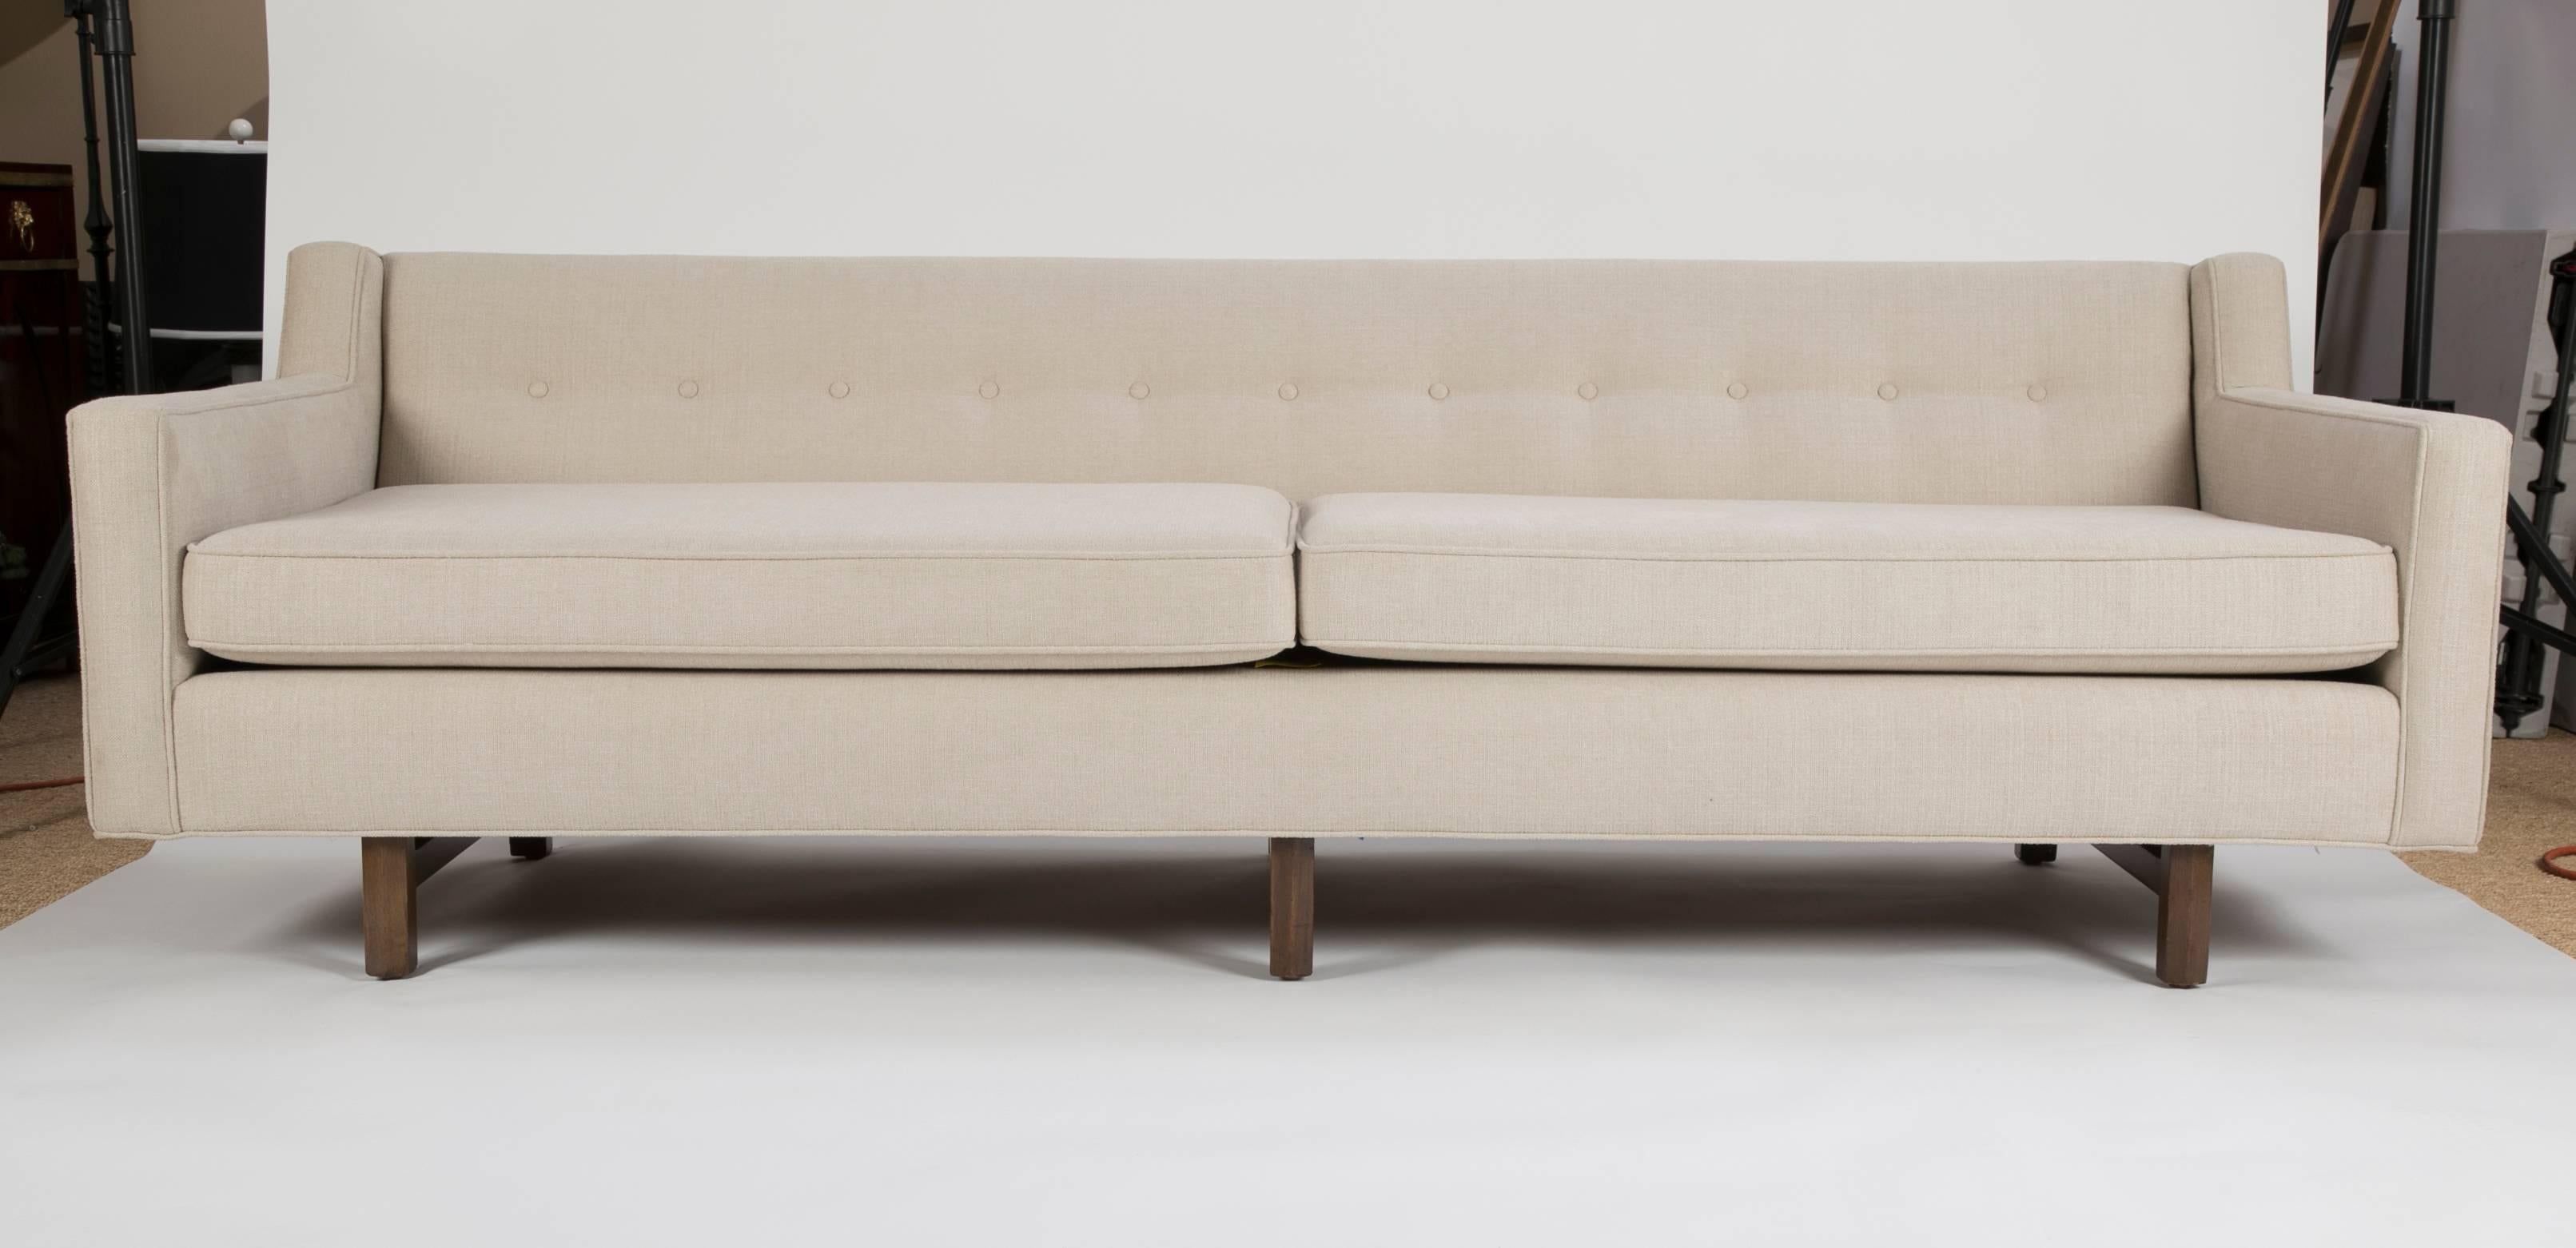 A midcentury sofa by Edward Wormley for Dunbar with faceted legs and stretchers. Newly upholstered.